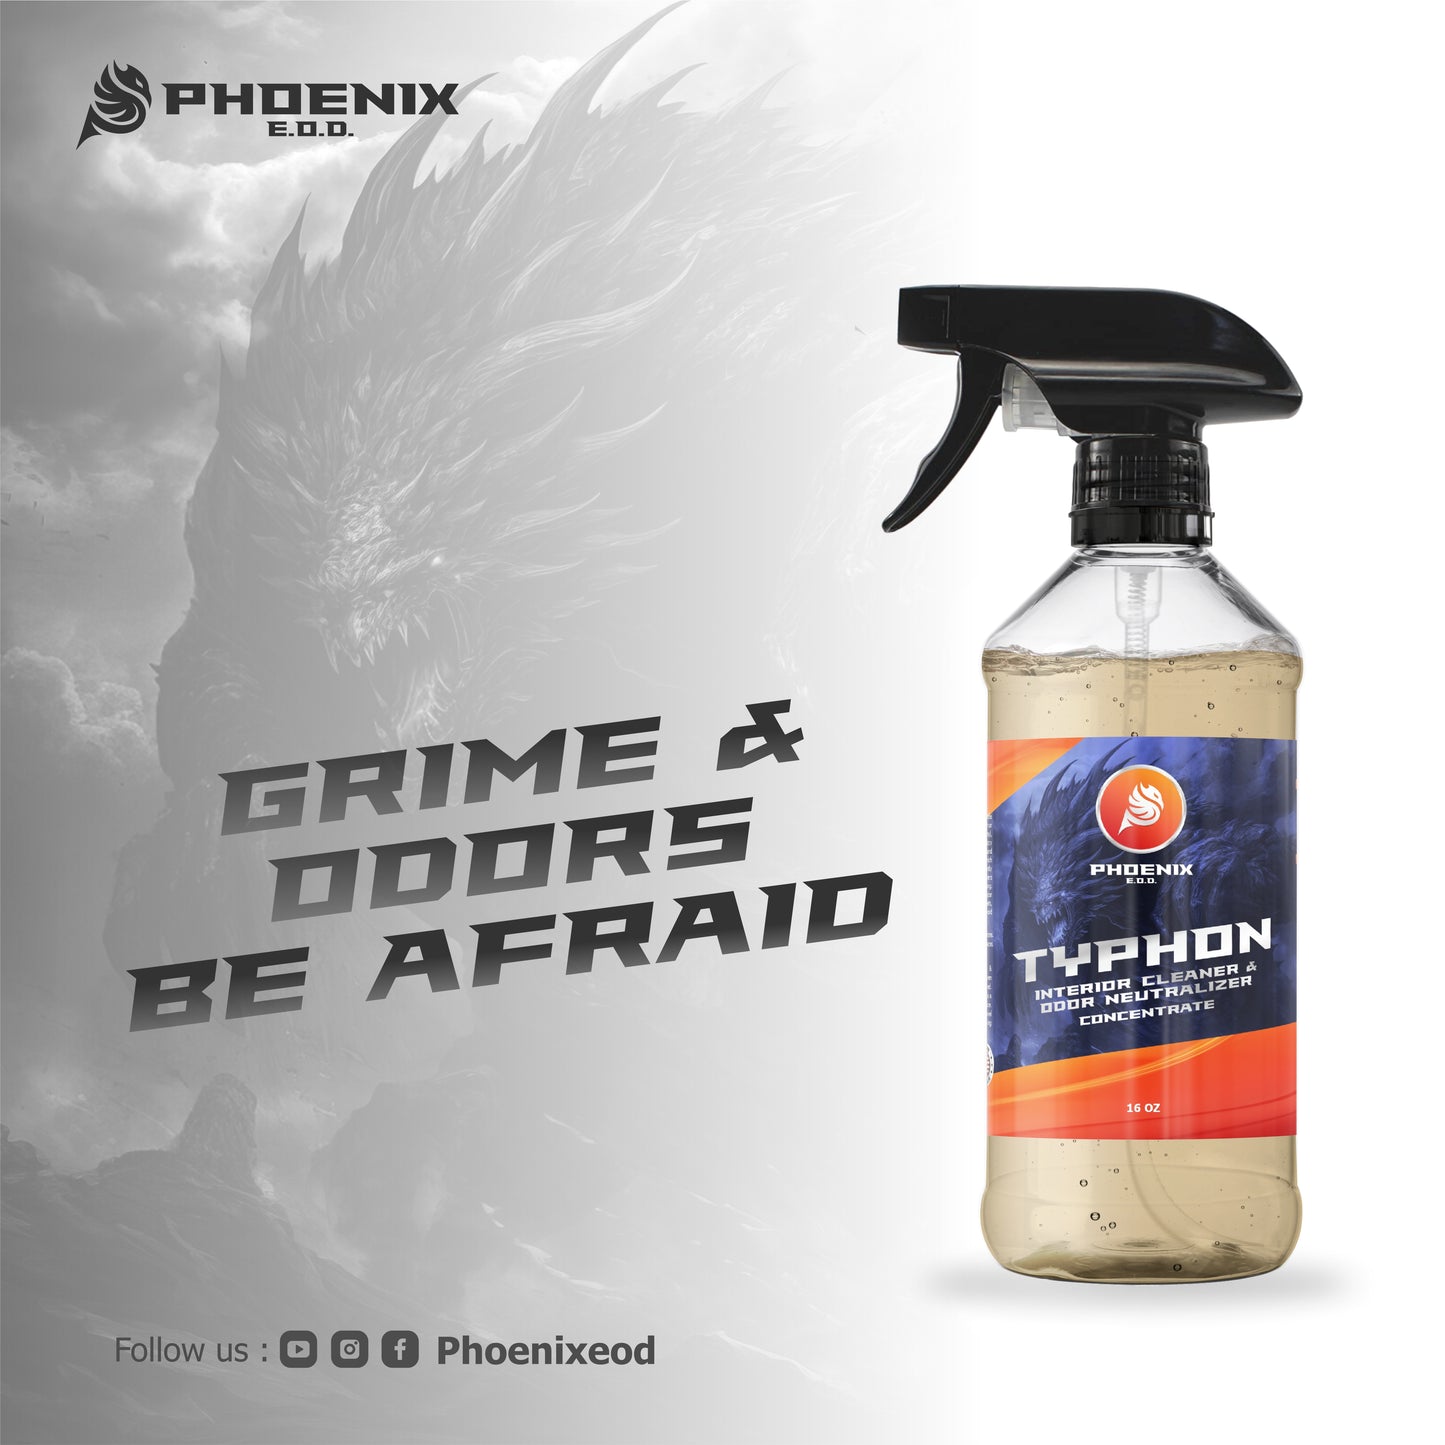 Phoenix: Typhon Interior Cleaner & Odor Neutralizer - Concentrate